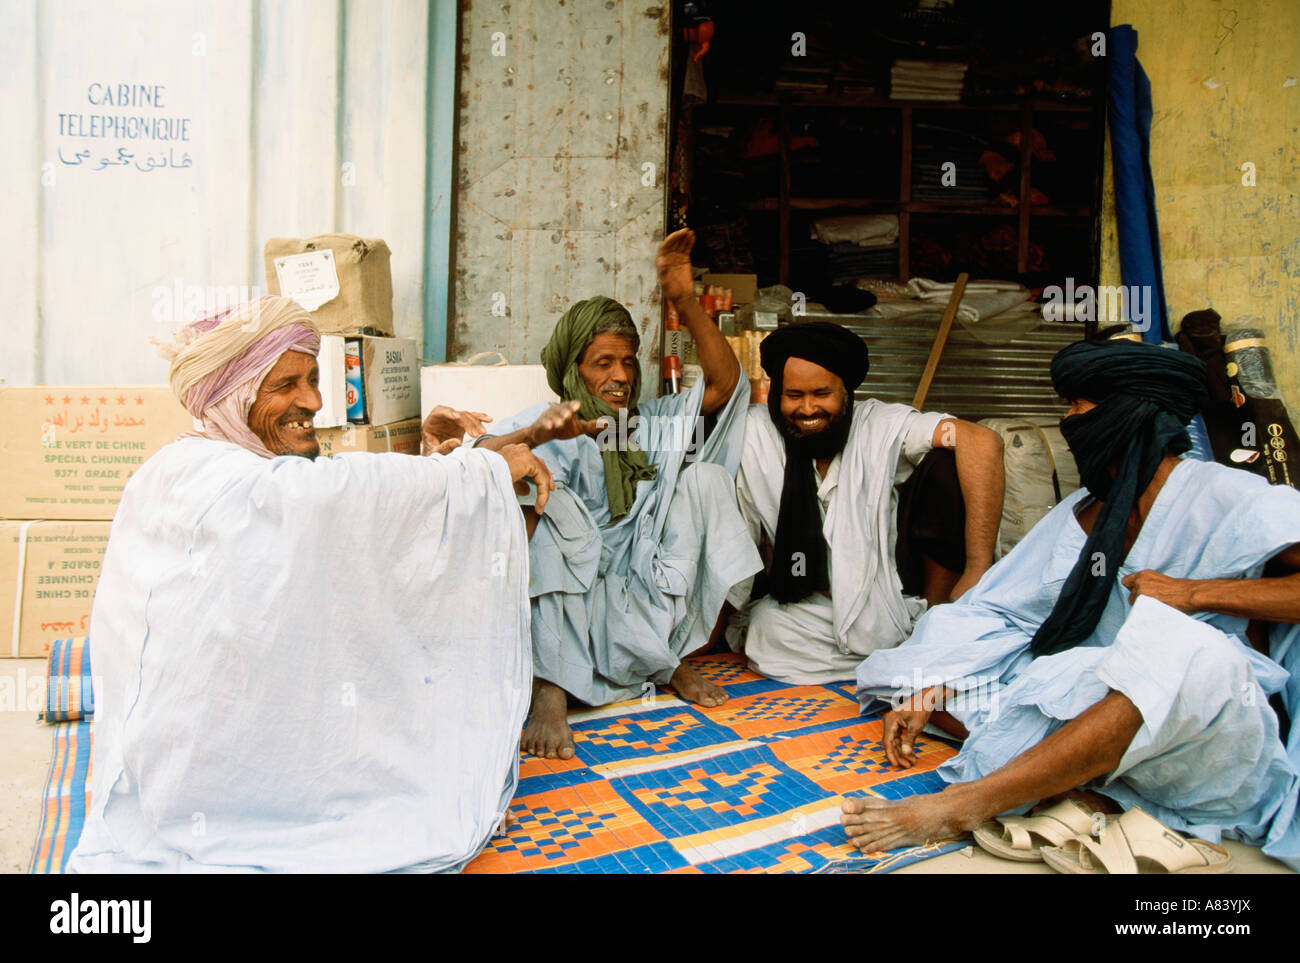 Berber herders in traditional robes sitting outside a shop, talking and laughing Stock Photo